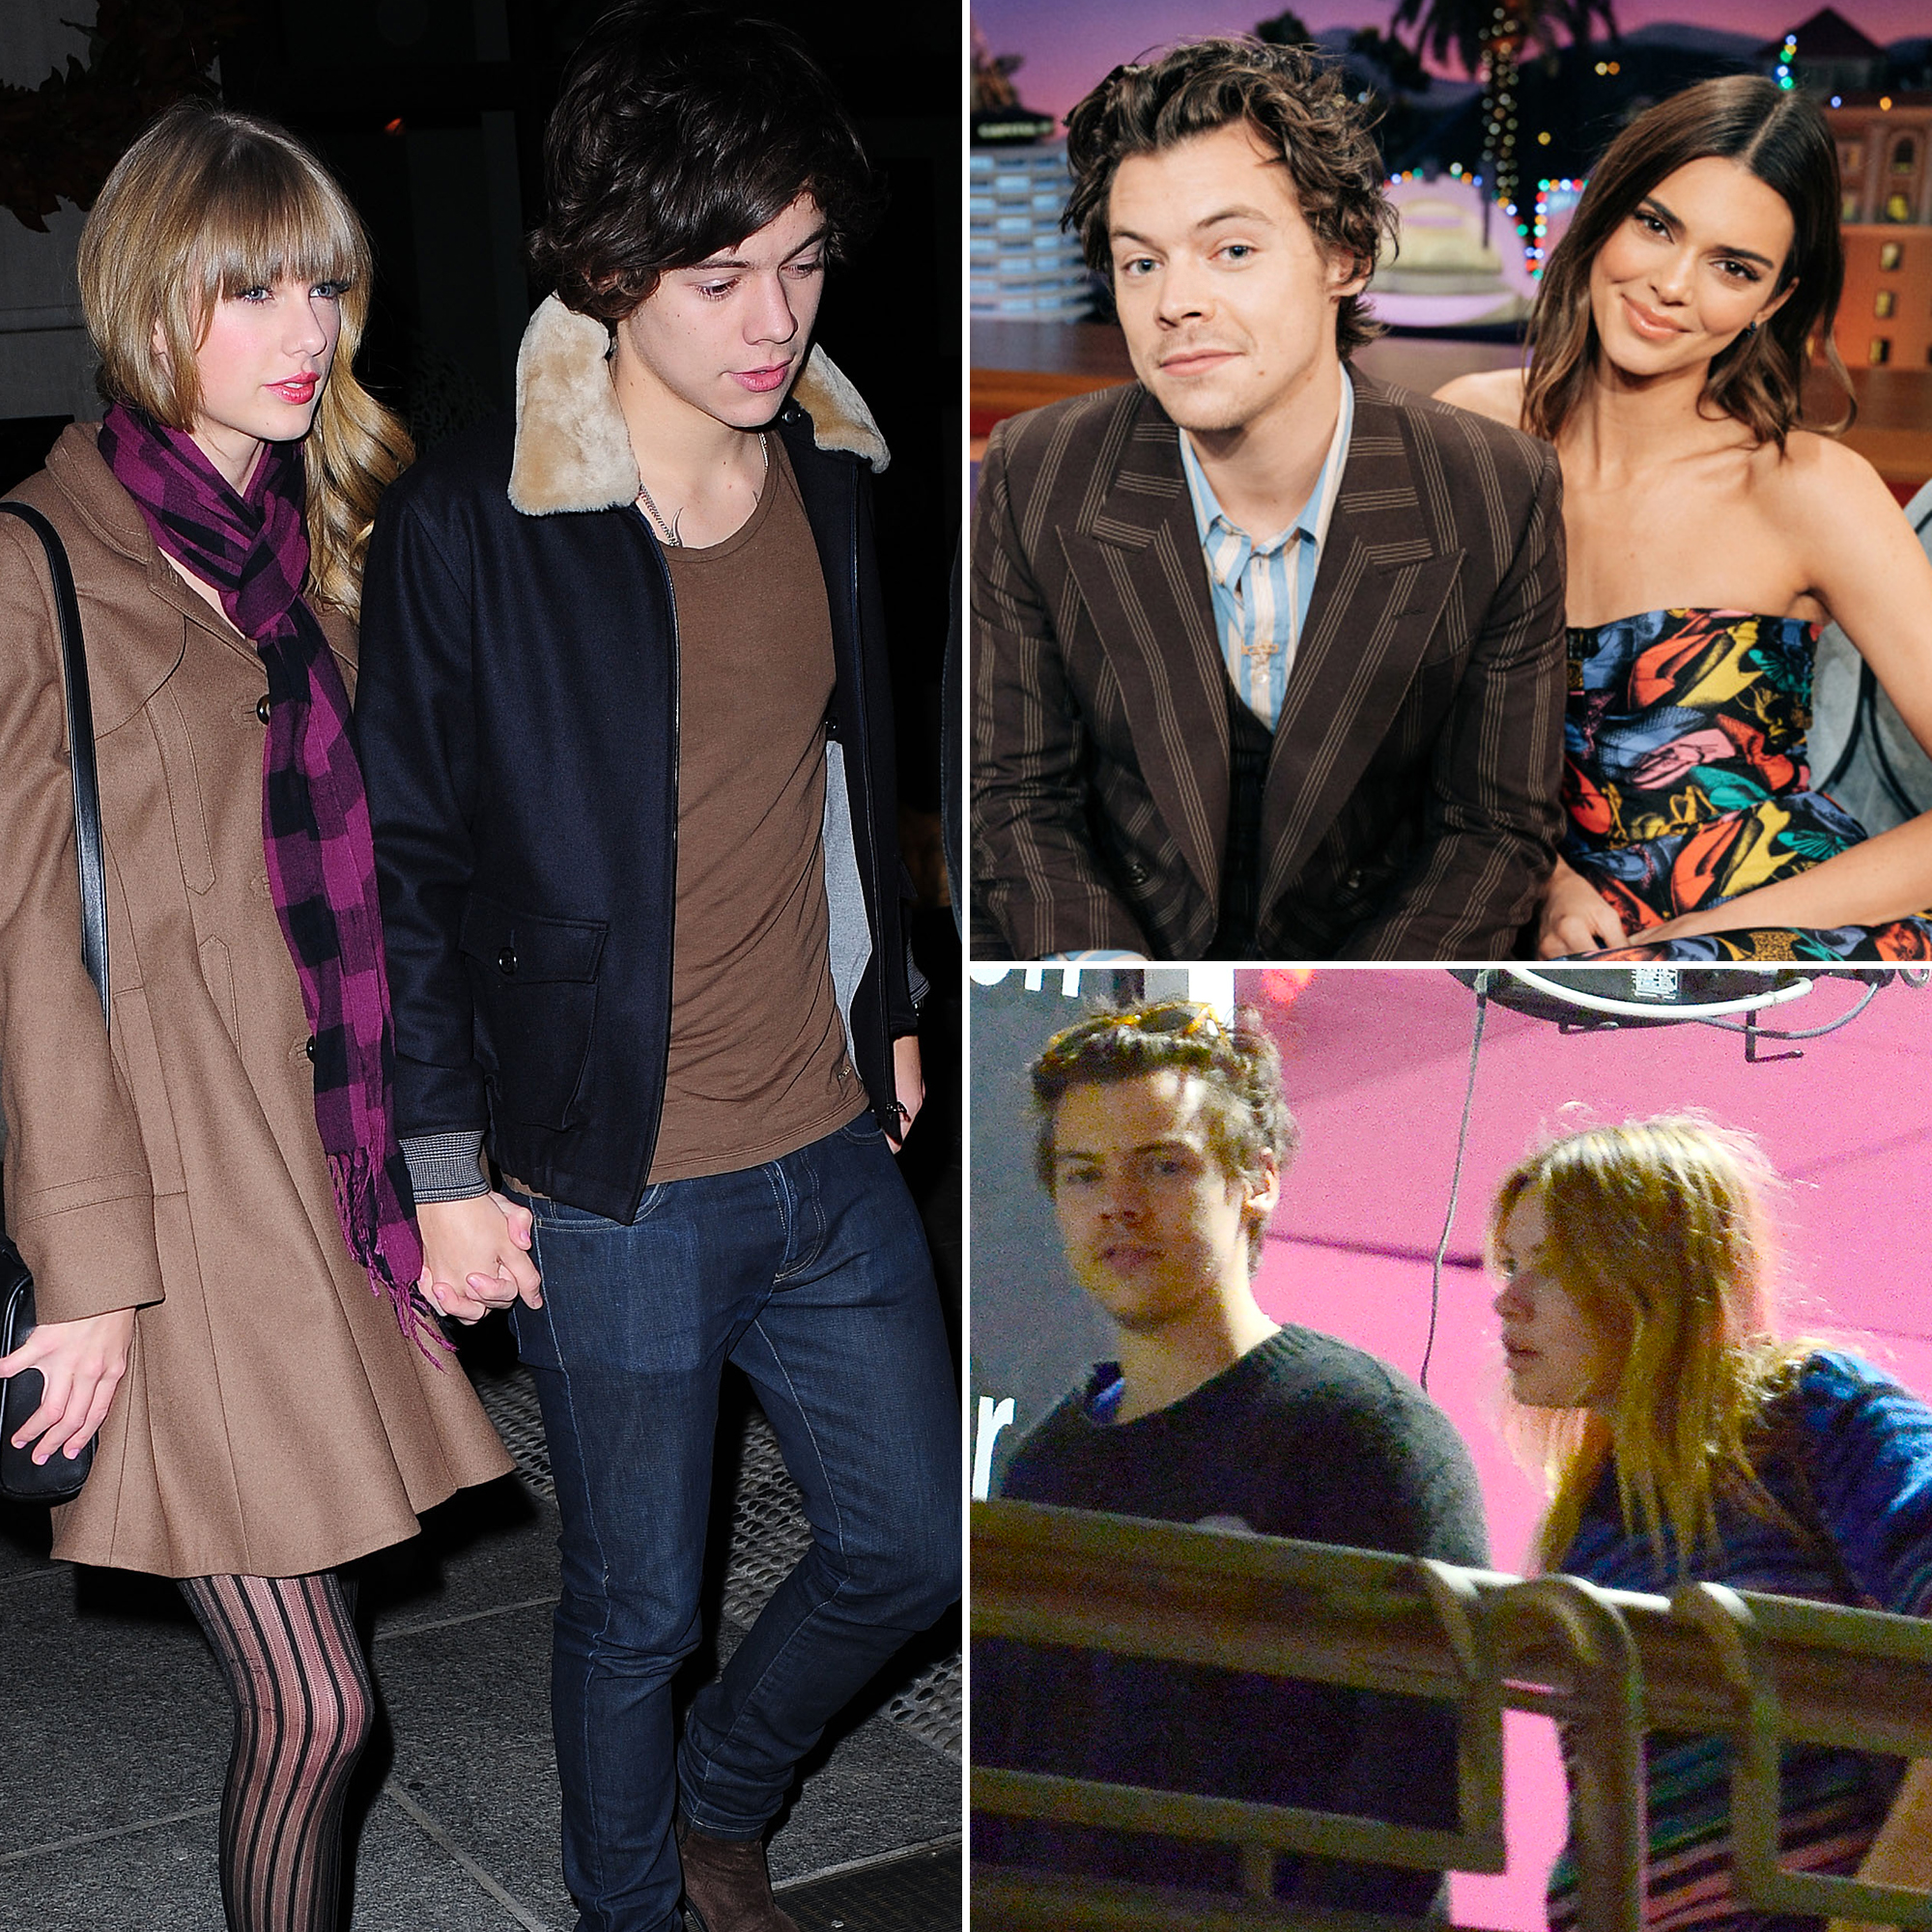 Harry Styles' Dating History: Taylor Swift, Kendall Jenner, More